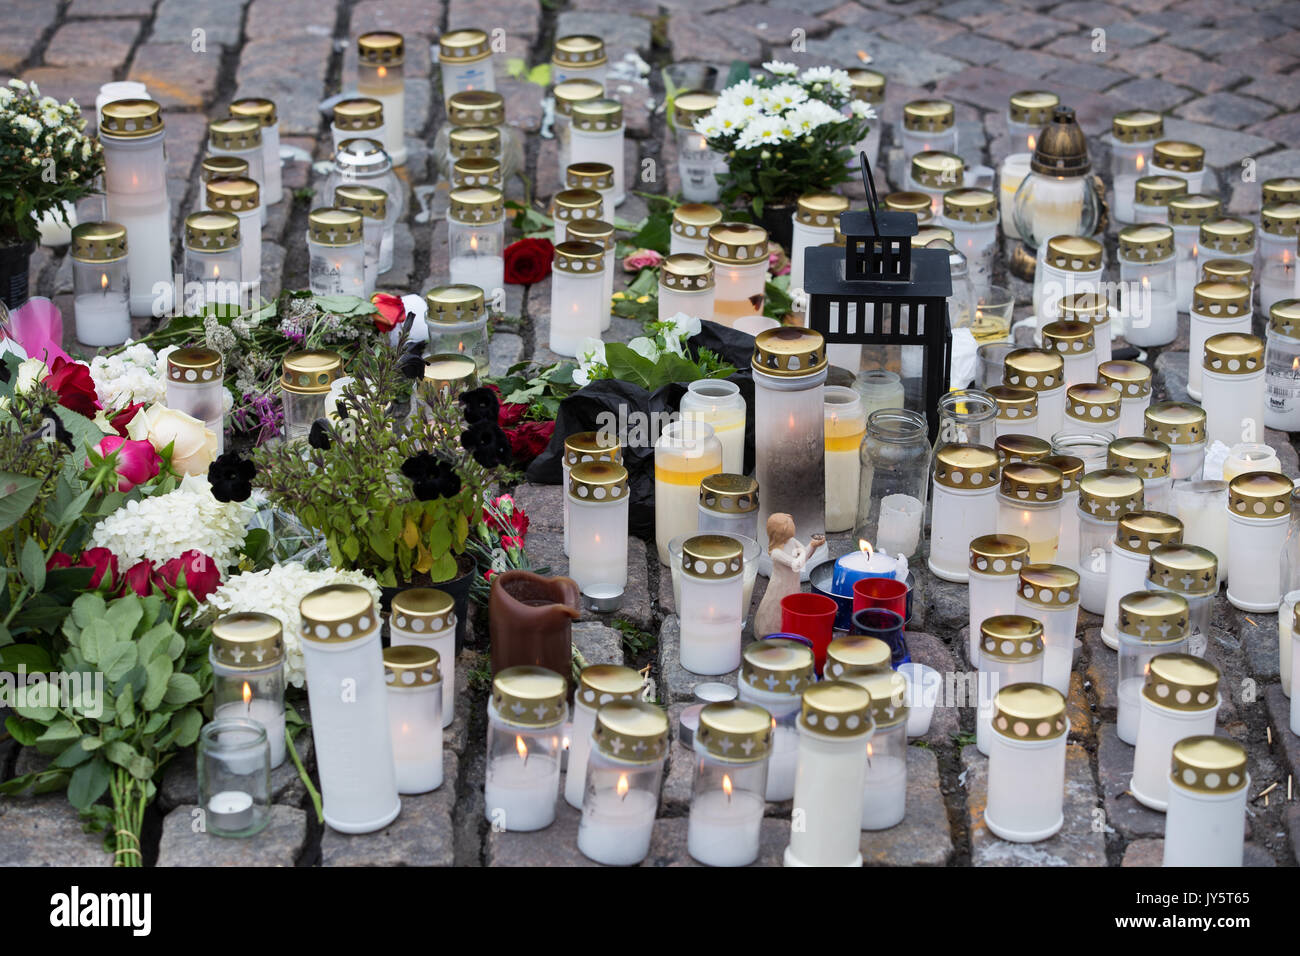 Turku, Finland. 19th of August 2017. Candles and flowers for the victims of knife attack in Turku market square. Two people have been killed and six others wounded in a knife attack that took place on friday 18th of august at Turku market square and Puutori. The police was able to stop the attacker within minutes after the first emergency call by shooting him at thigh. Police is investigating the attack as an act of terrorism. Credit: Jarmo Piironen/Alamy Live News Stock Photo